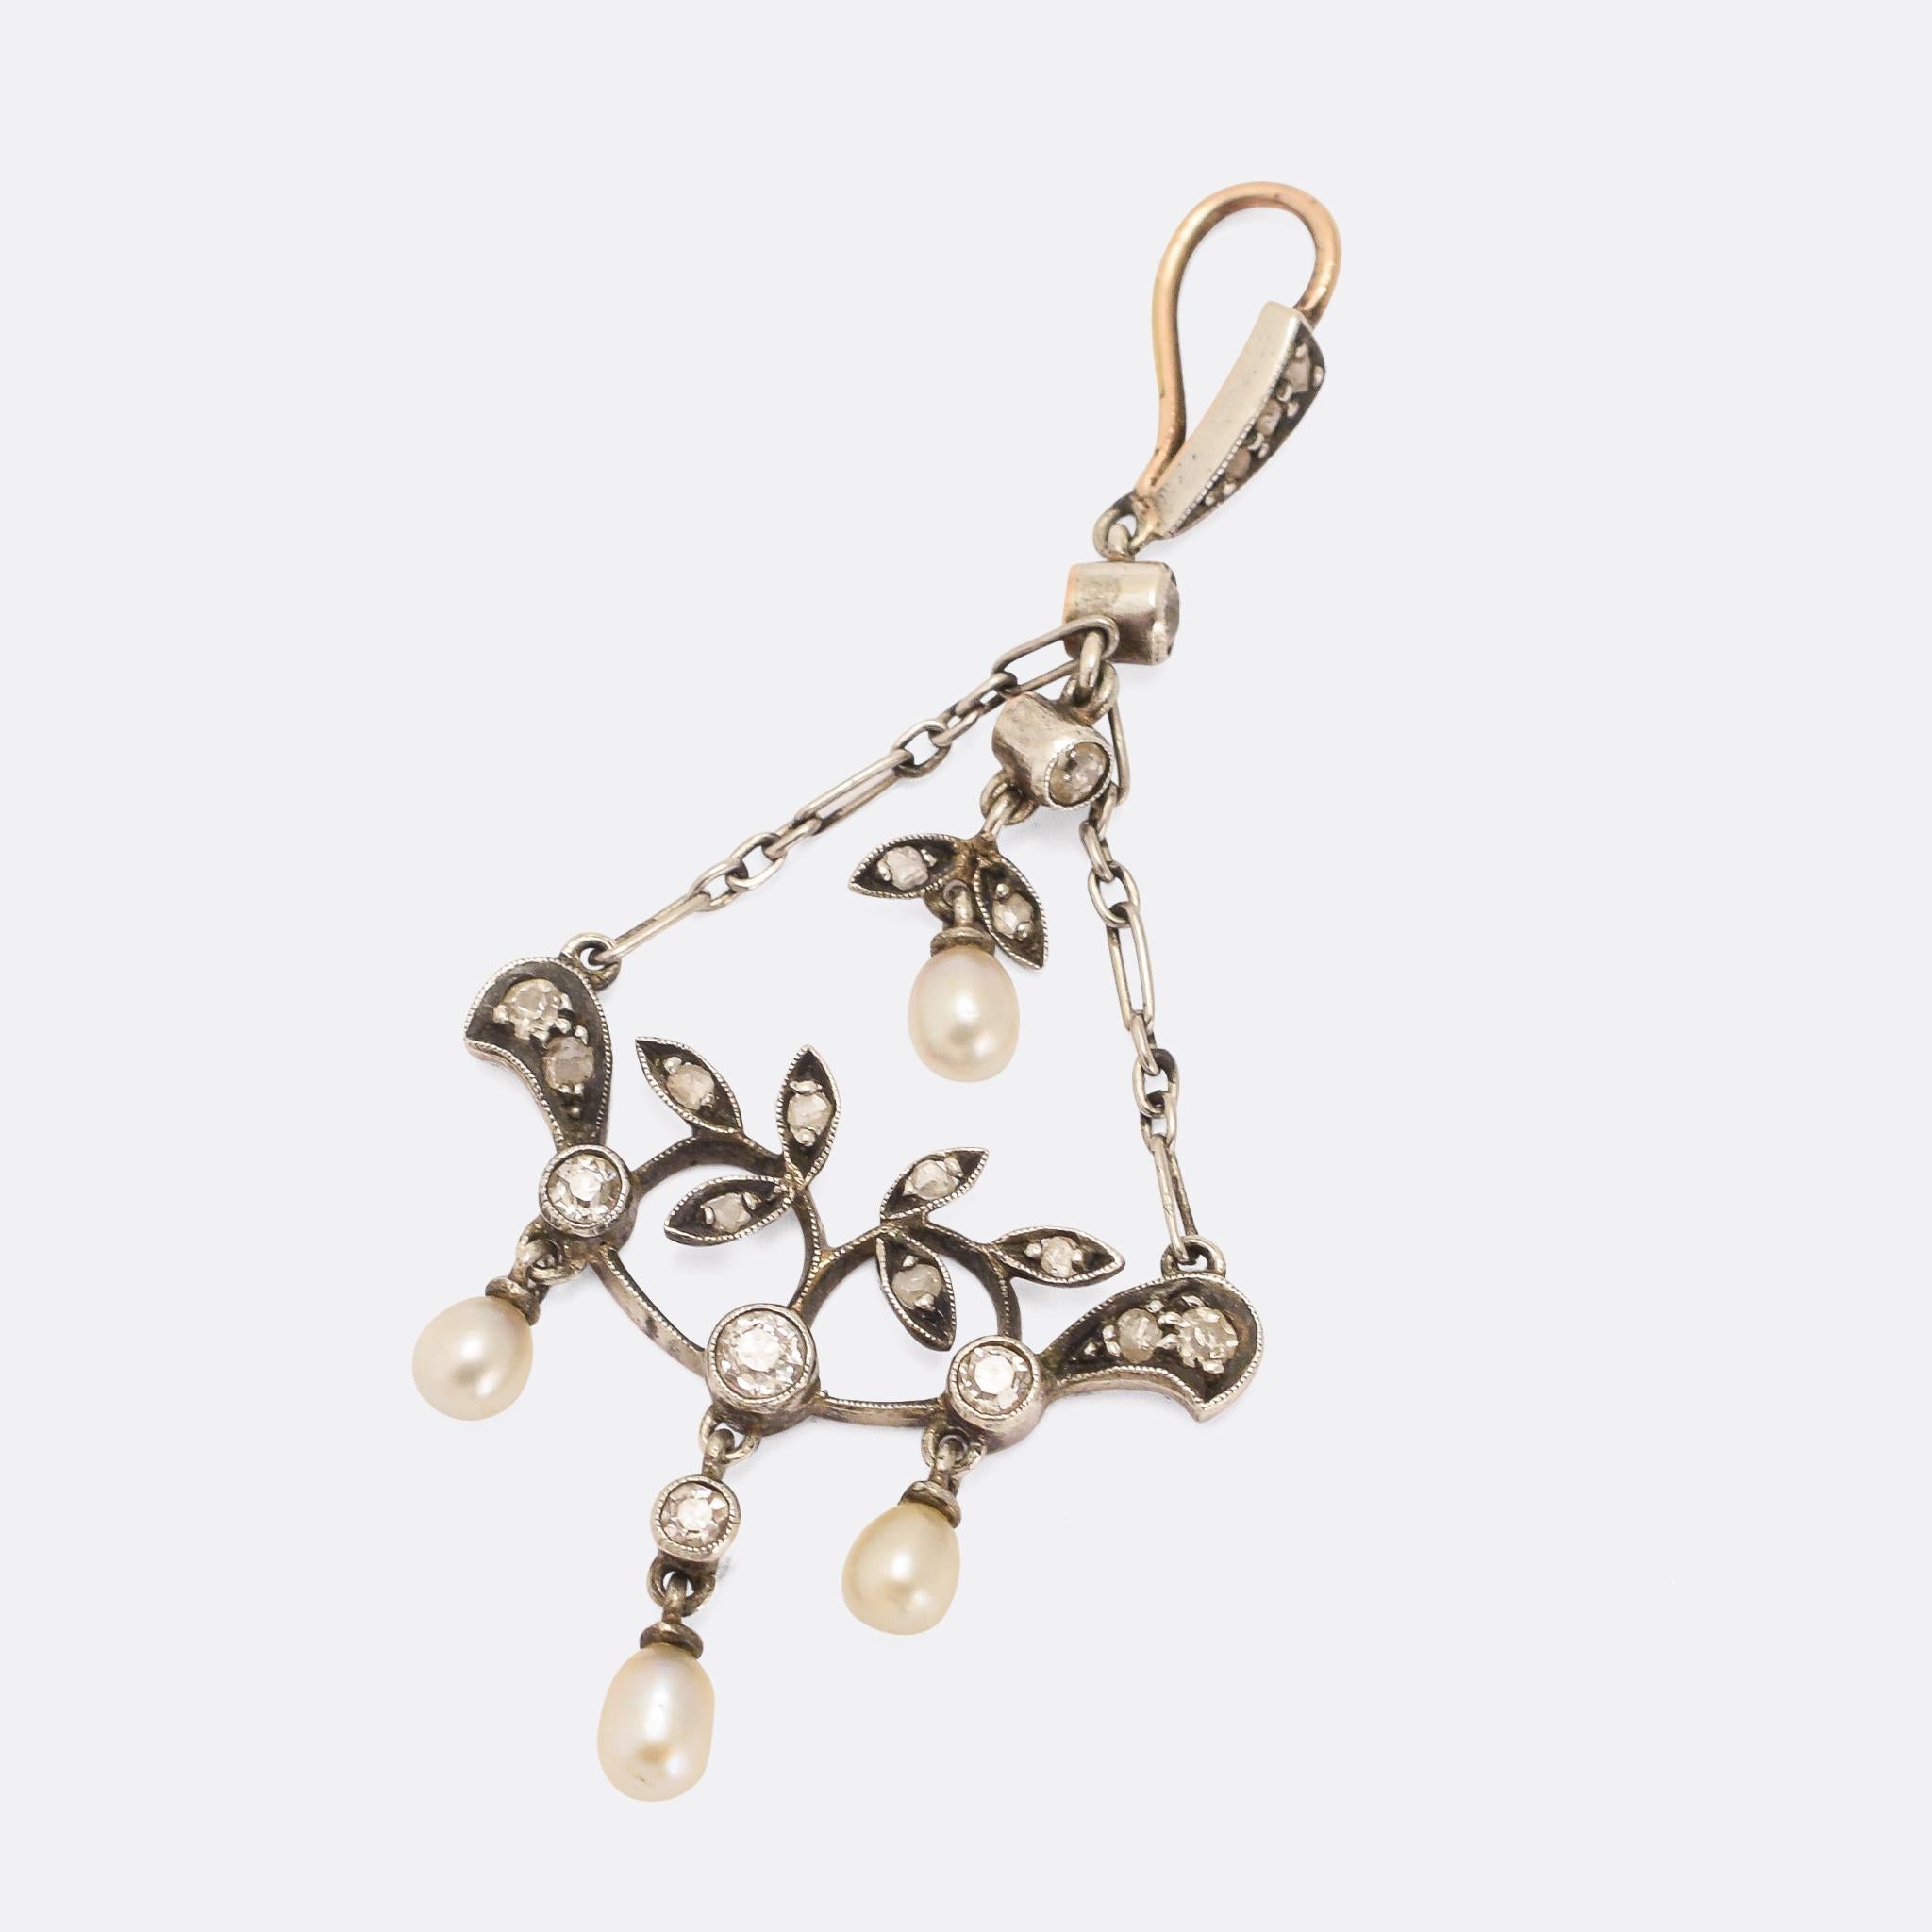 A divine late Victorian pendant set with diamonds and pearls. It was made at the turn of the 20th Century, with foliate motifs and millegrain detailing around the settings. It's crafted in platinum and 15k gold, set with natural pearls and old and